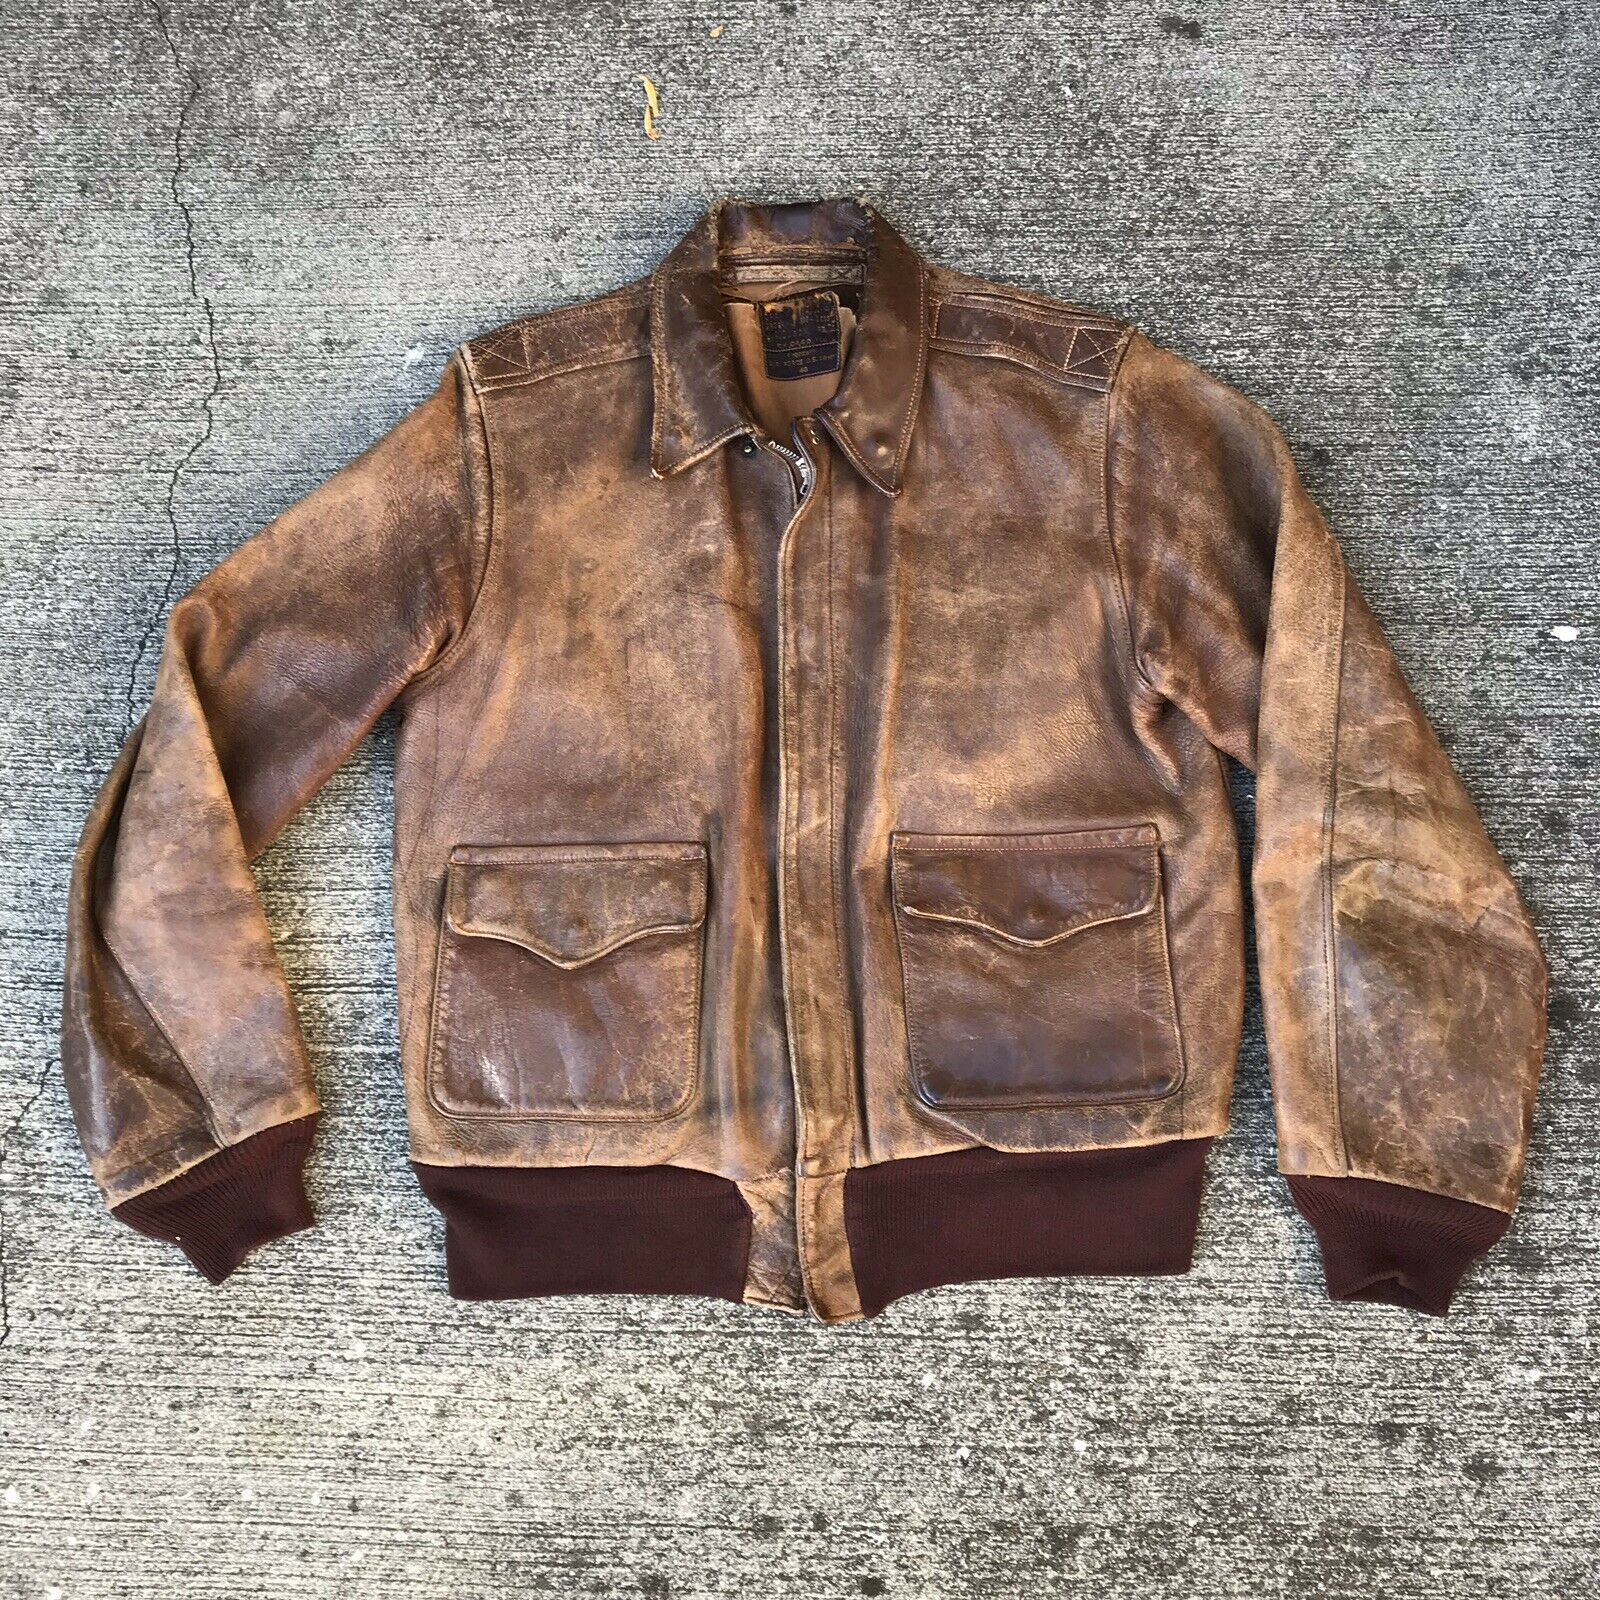 J A Dubow A2 For Sale On Ebay In California | Vintage Leather Jackets Forum